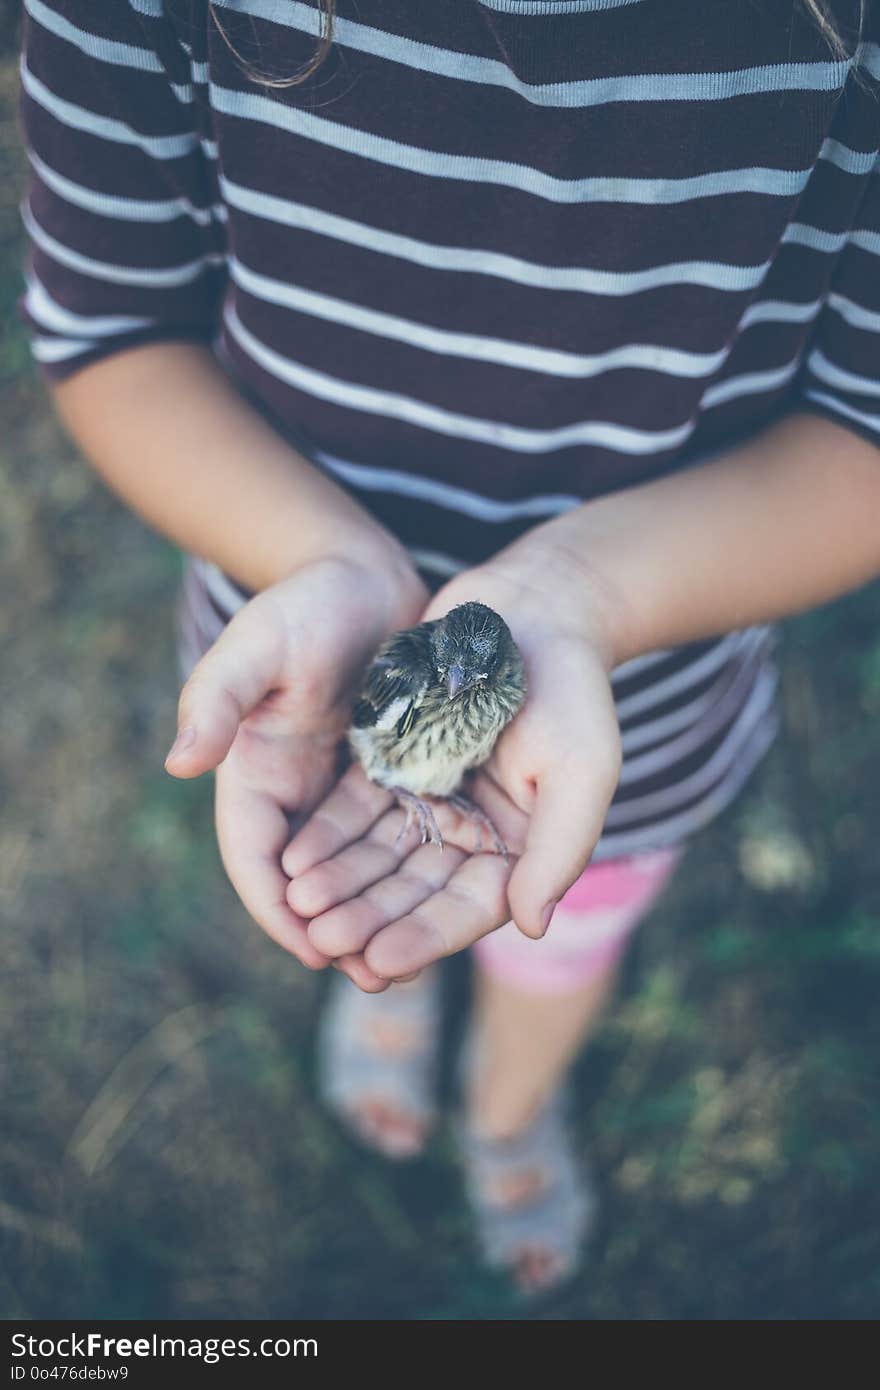 The little bird that fell from the nest in the hands of a child.